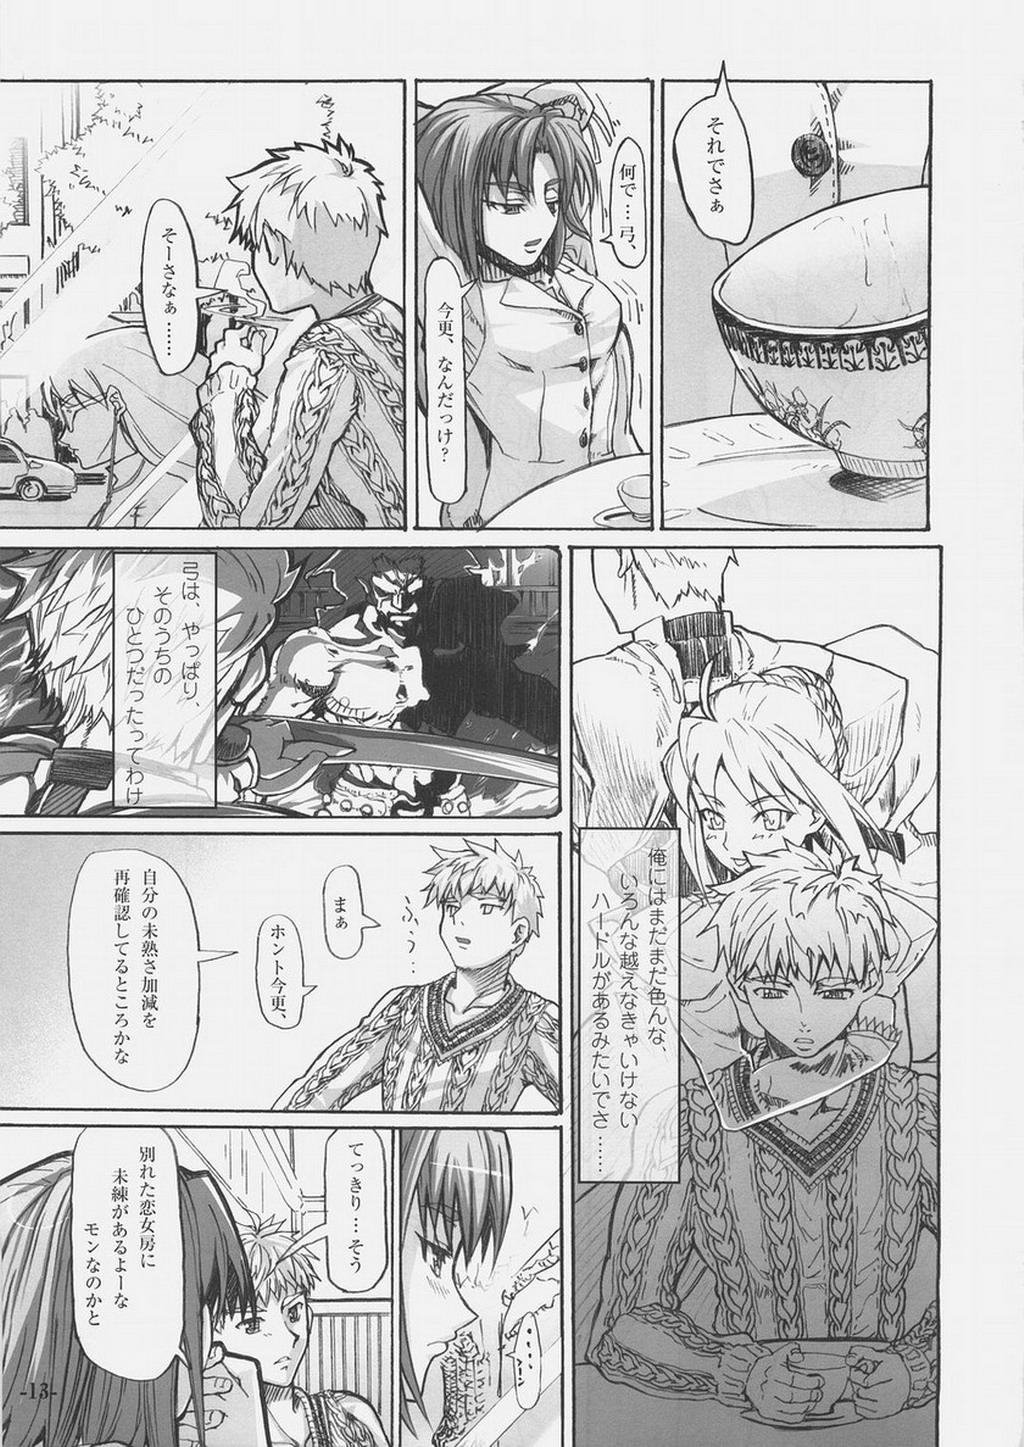 Anal Sex Light Her Fire! - Fate stay night Lesbiansex - Page 12